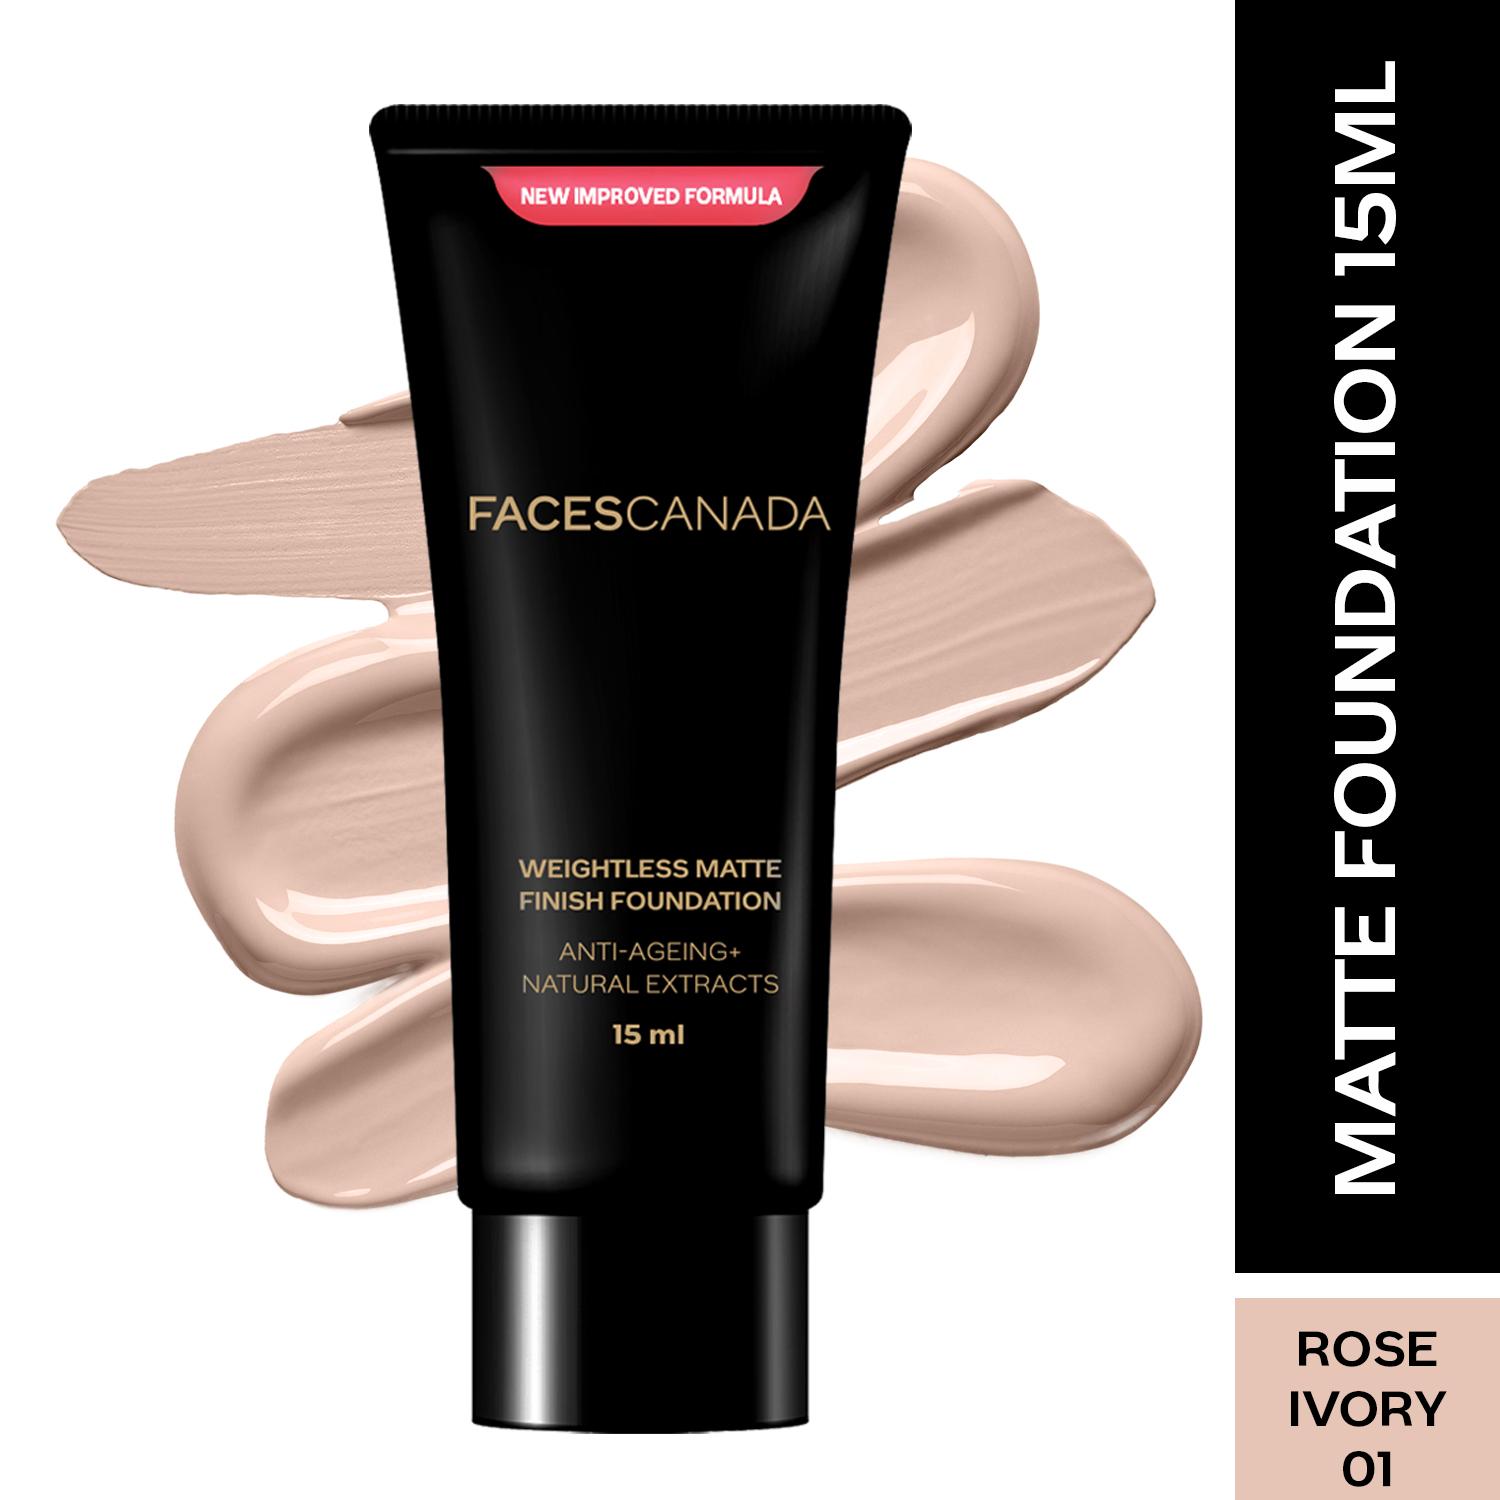 Faces Canada | Faces Canada Weightless Matte Finish Foundation - Rose Ivory, Anti-Ageing, Non-Clog Pores (15 ml)